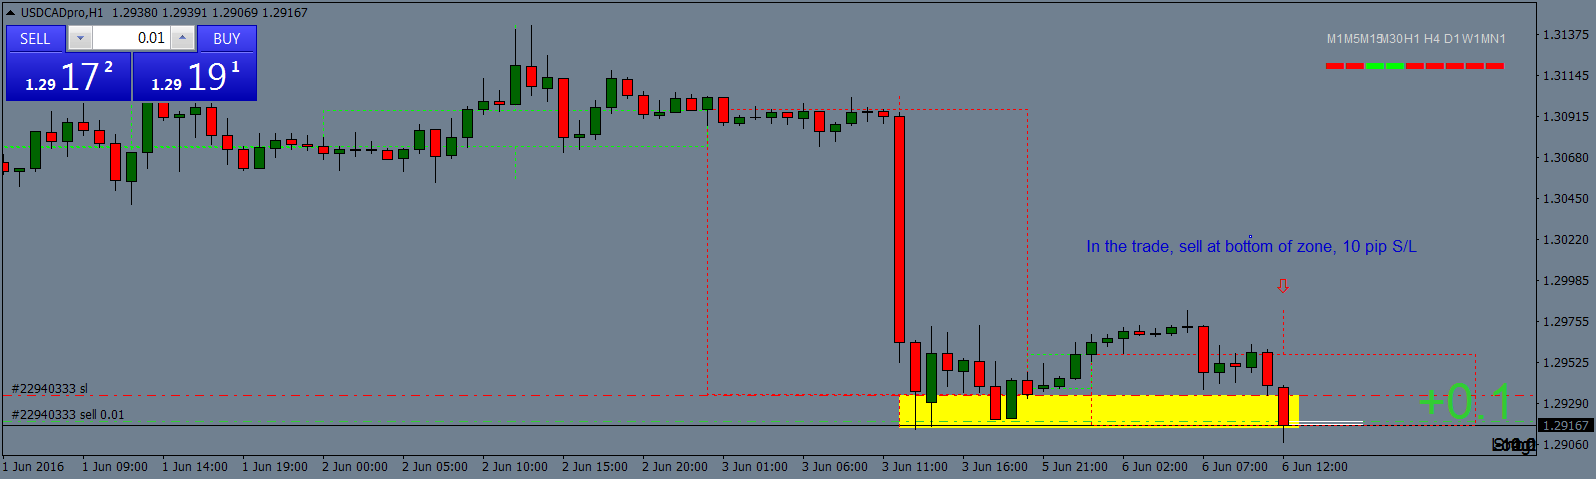 USDCADproH1wip.png